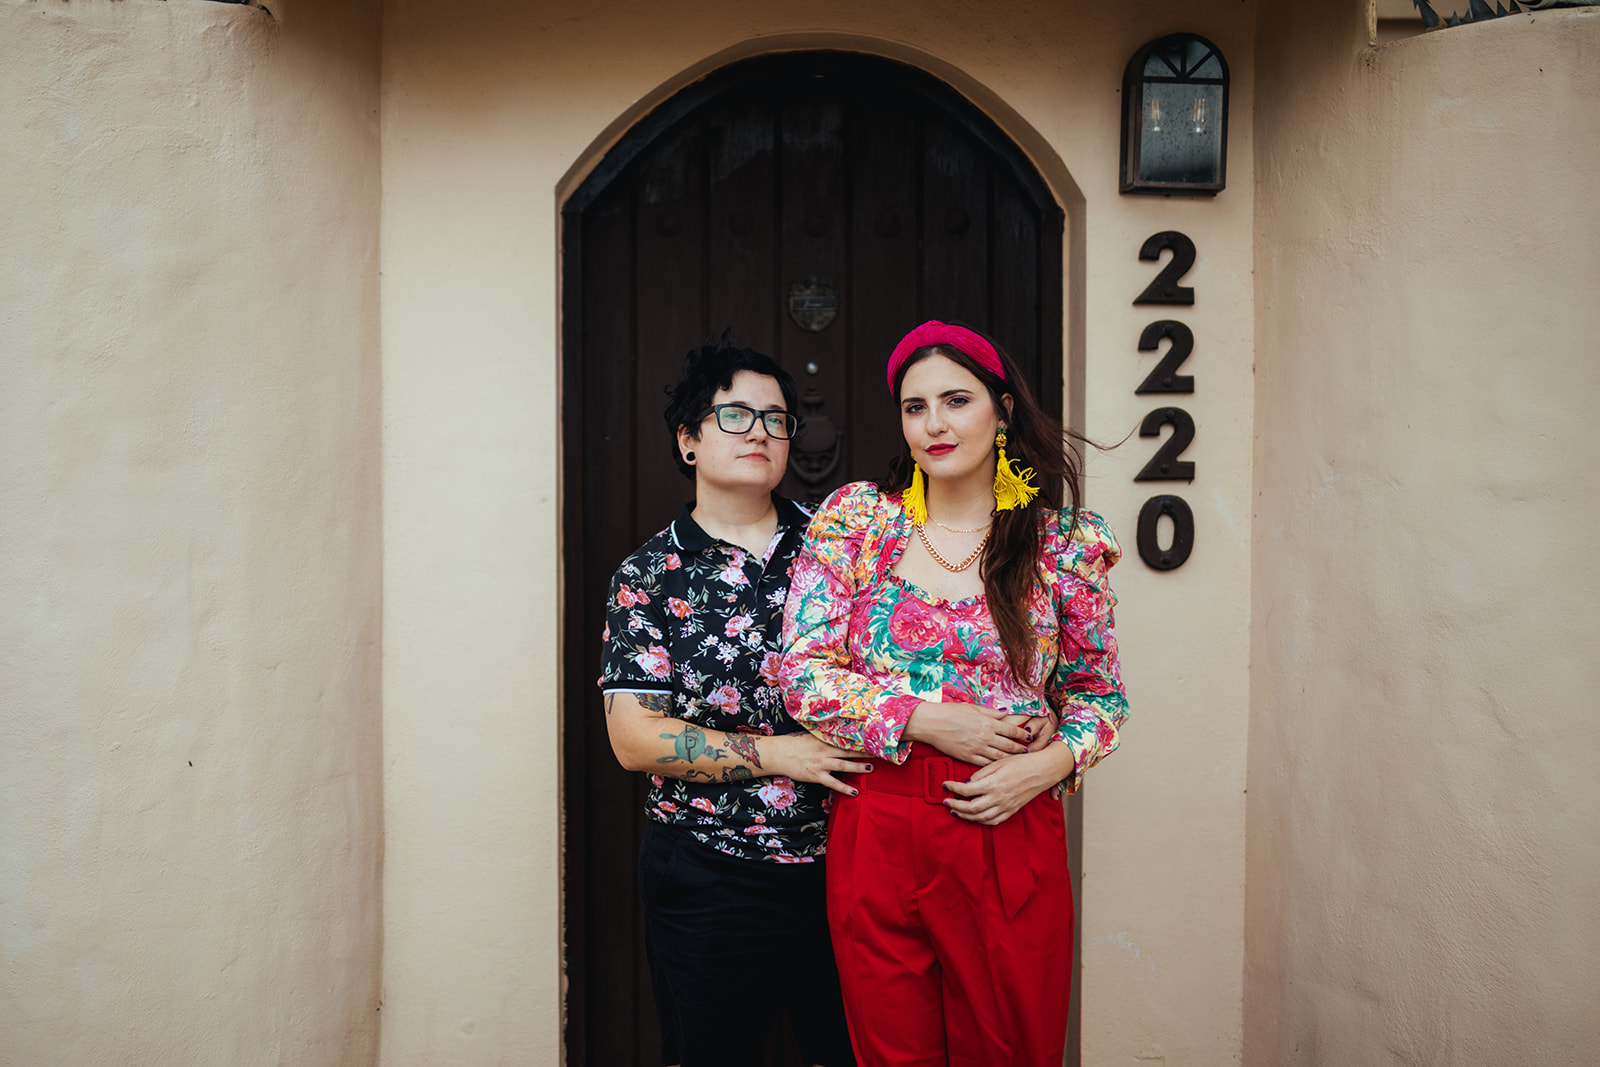 LGBTQ couple in colorful outfits stands in front of an arched doorway in San Juan Puerto Rico.